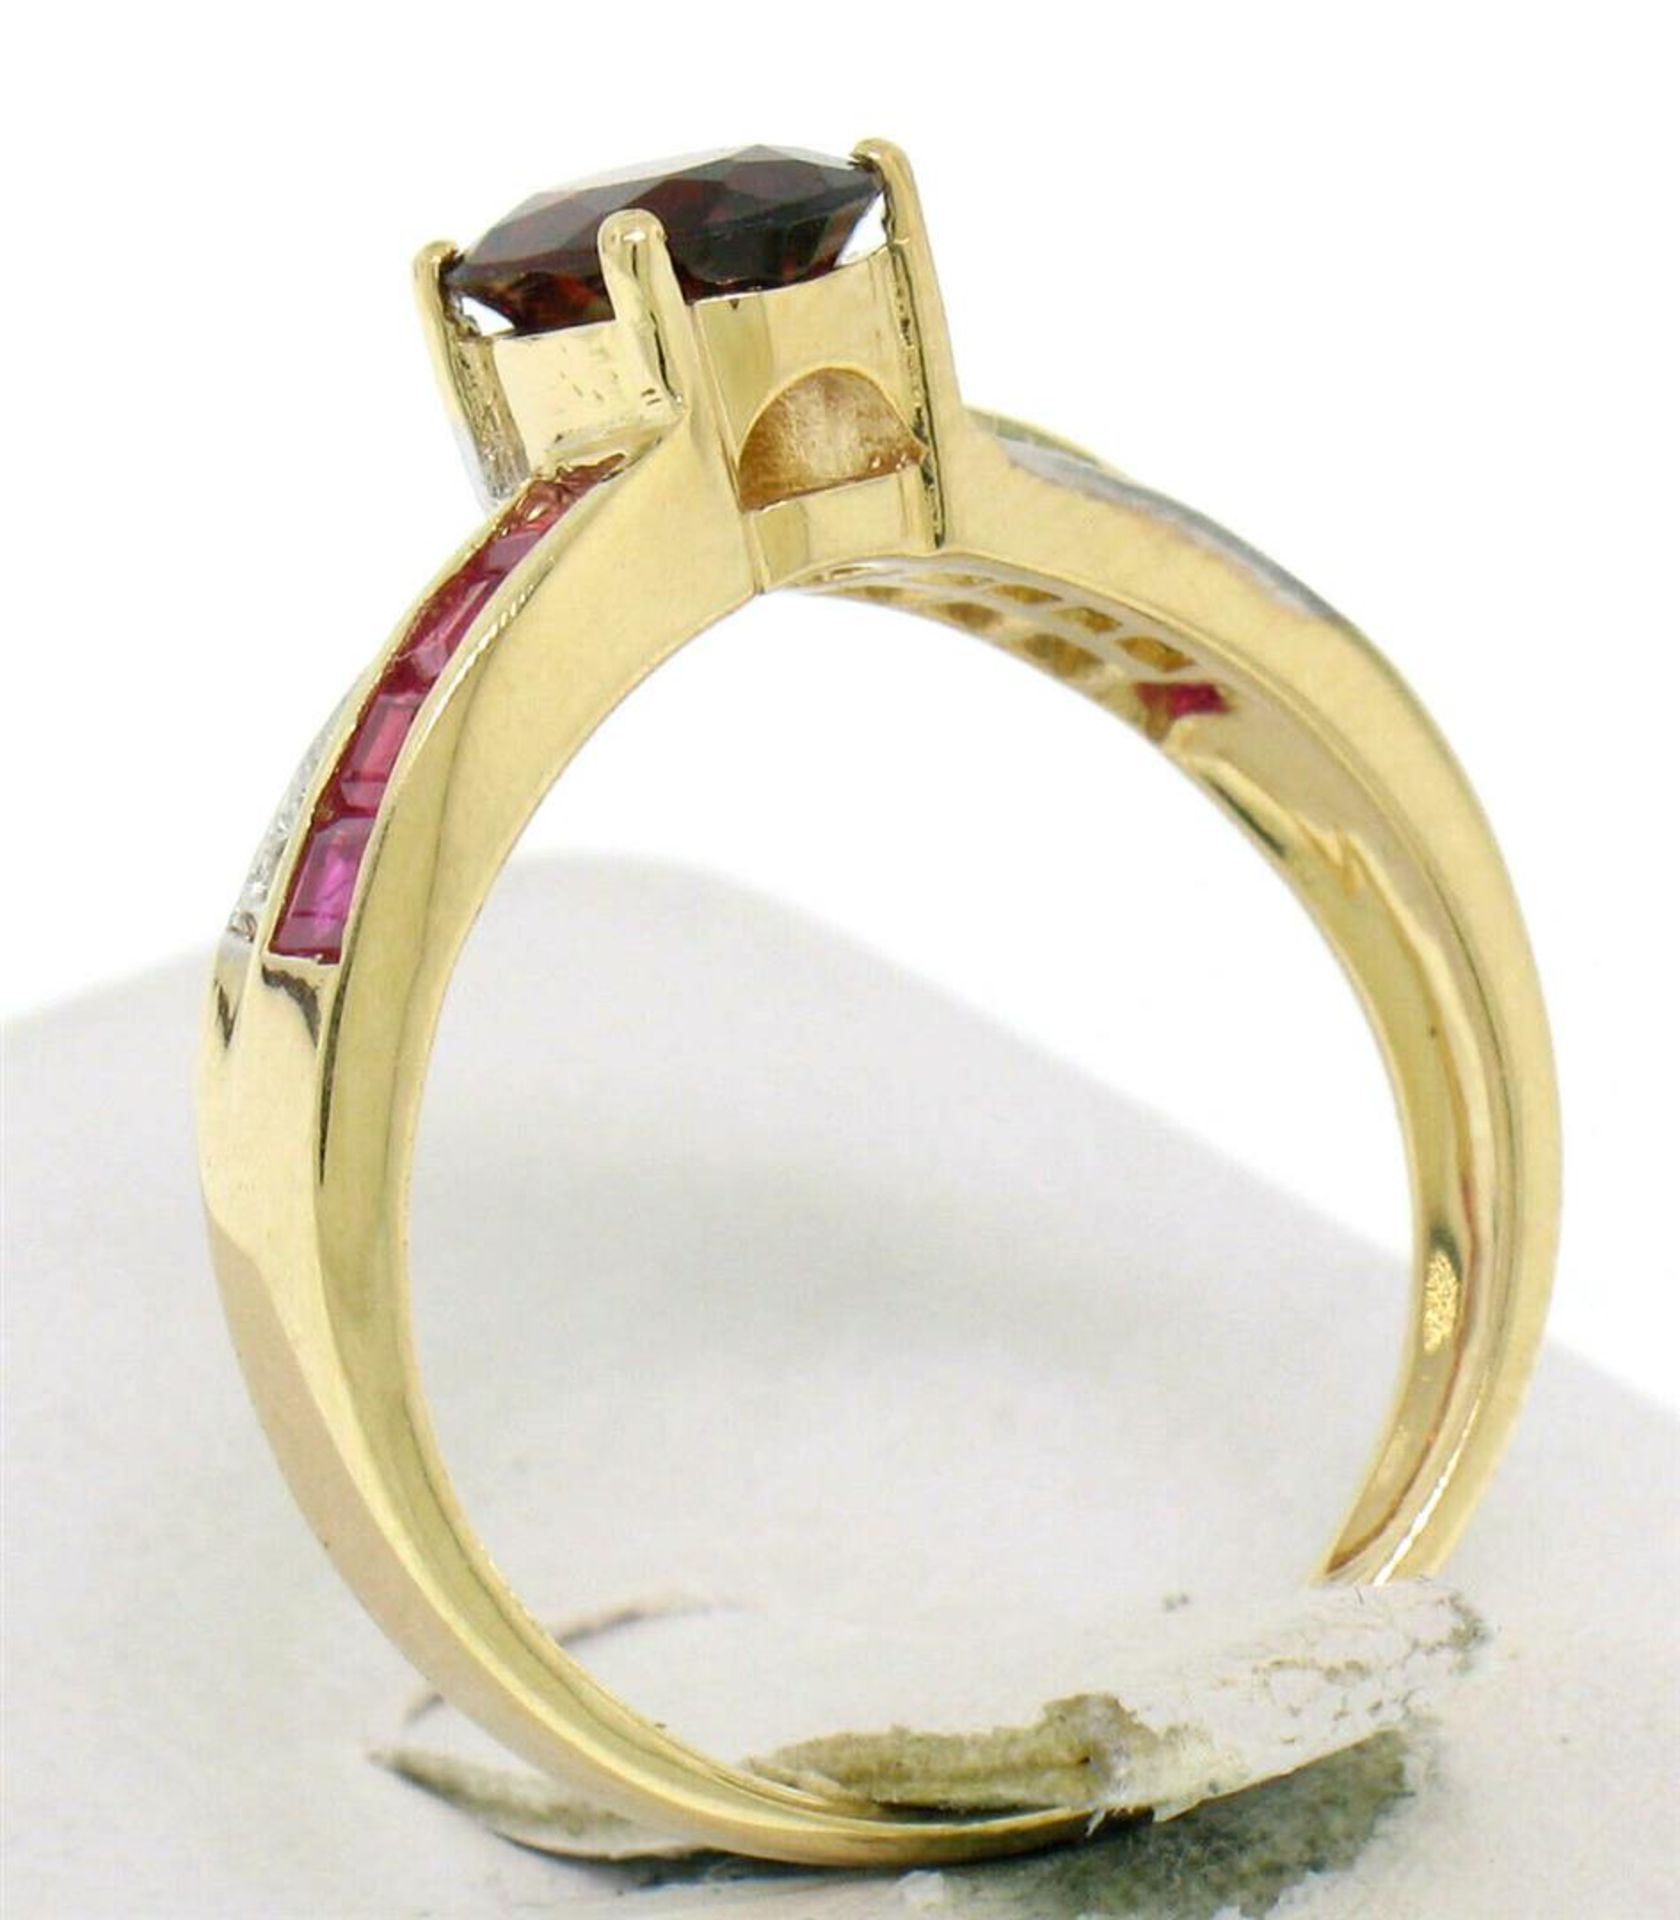 14kt Yellow Gold 1.58ctw Garnet, Ruby, and Diamond Ring - Image 5 of 6